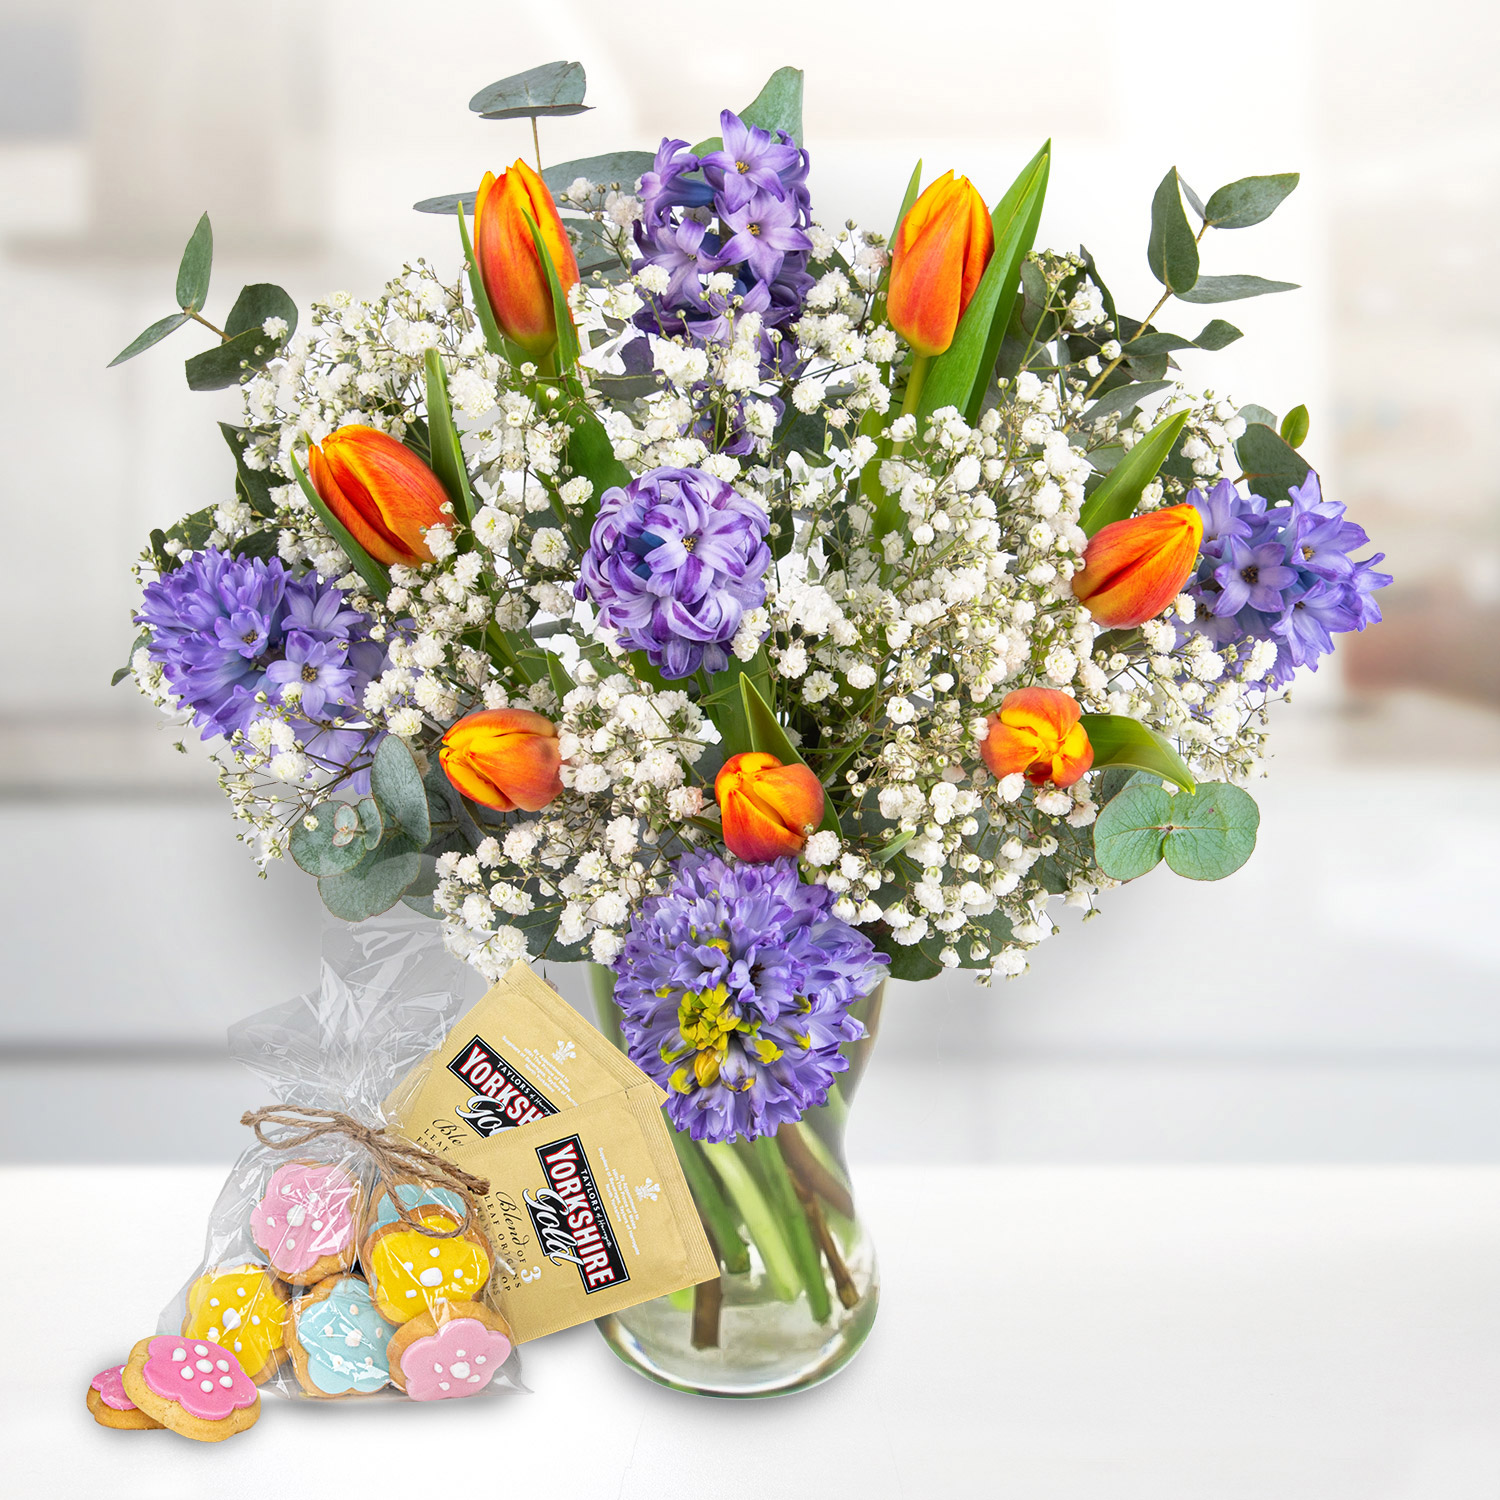 Tulips and Hyacinths Tea & Biscuits Gift